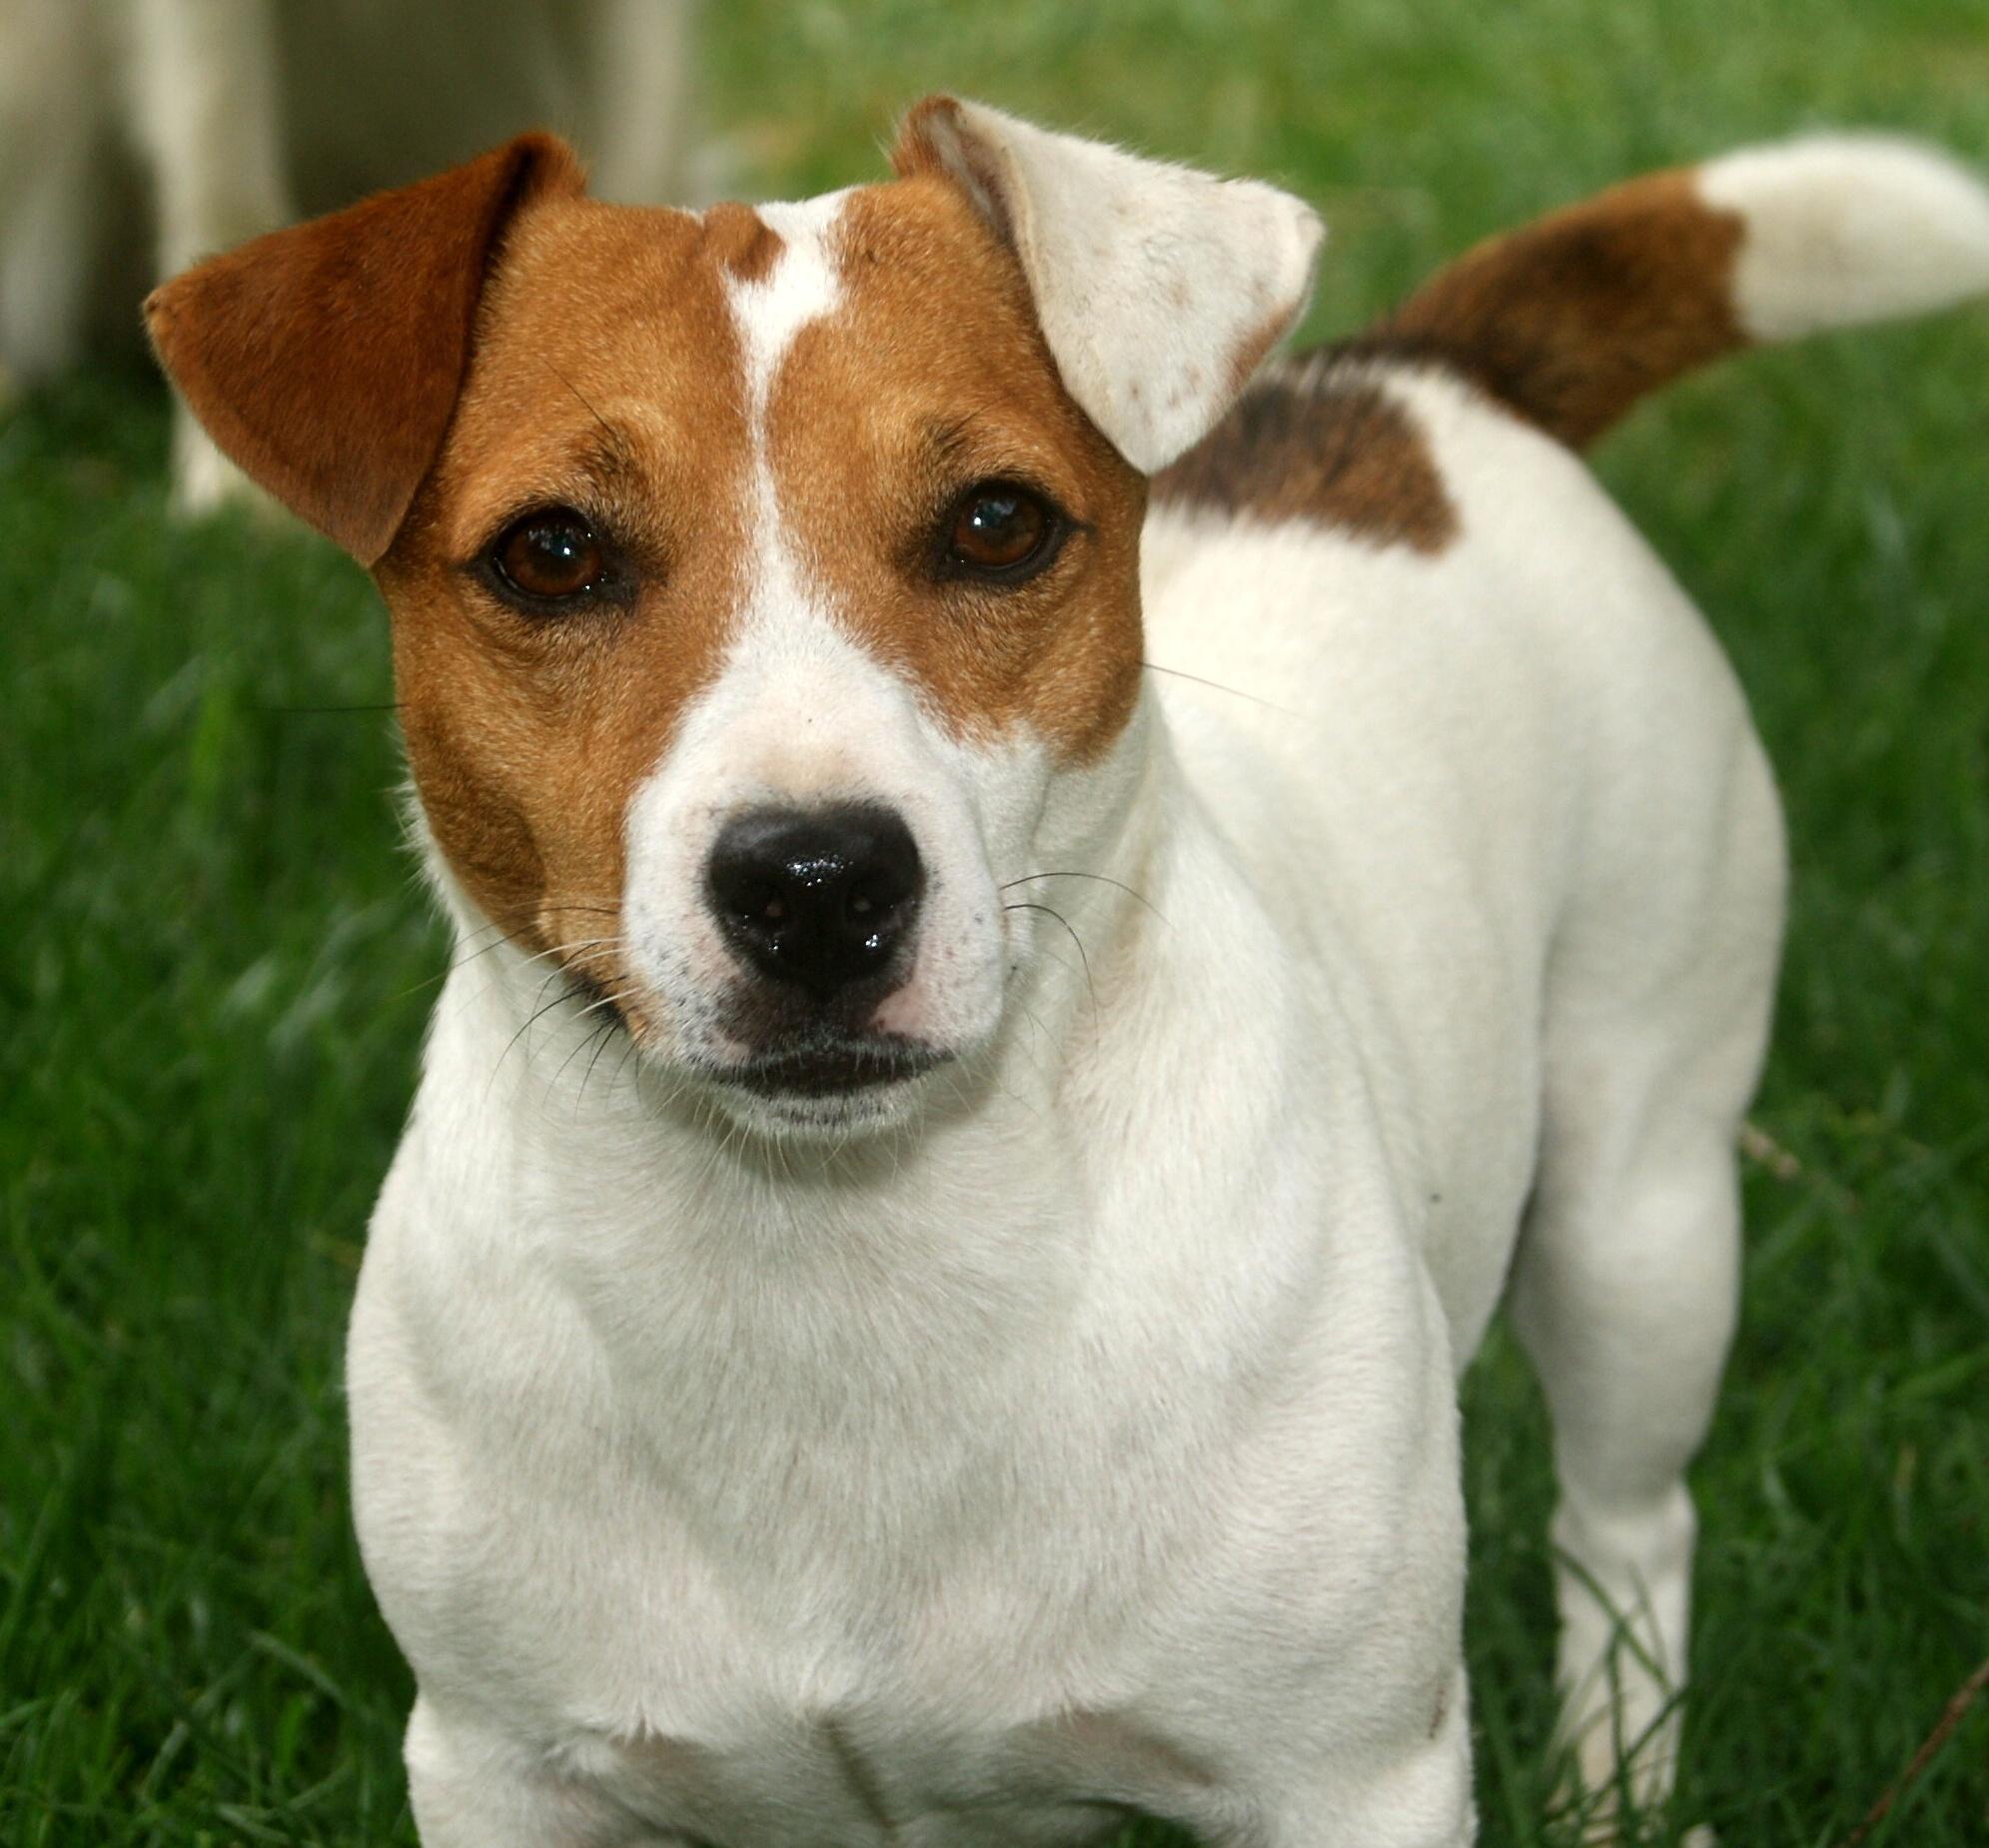 Displaying Jack Russell Terrier Picture on Animal Picture Society